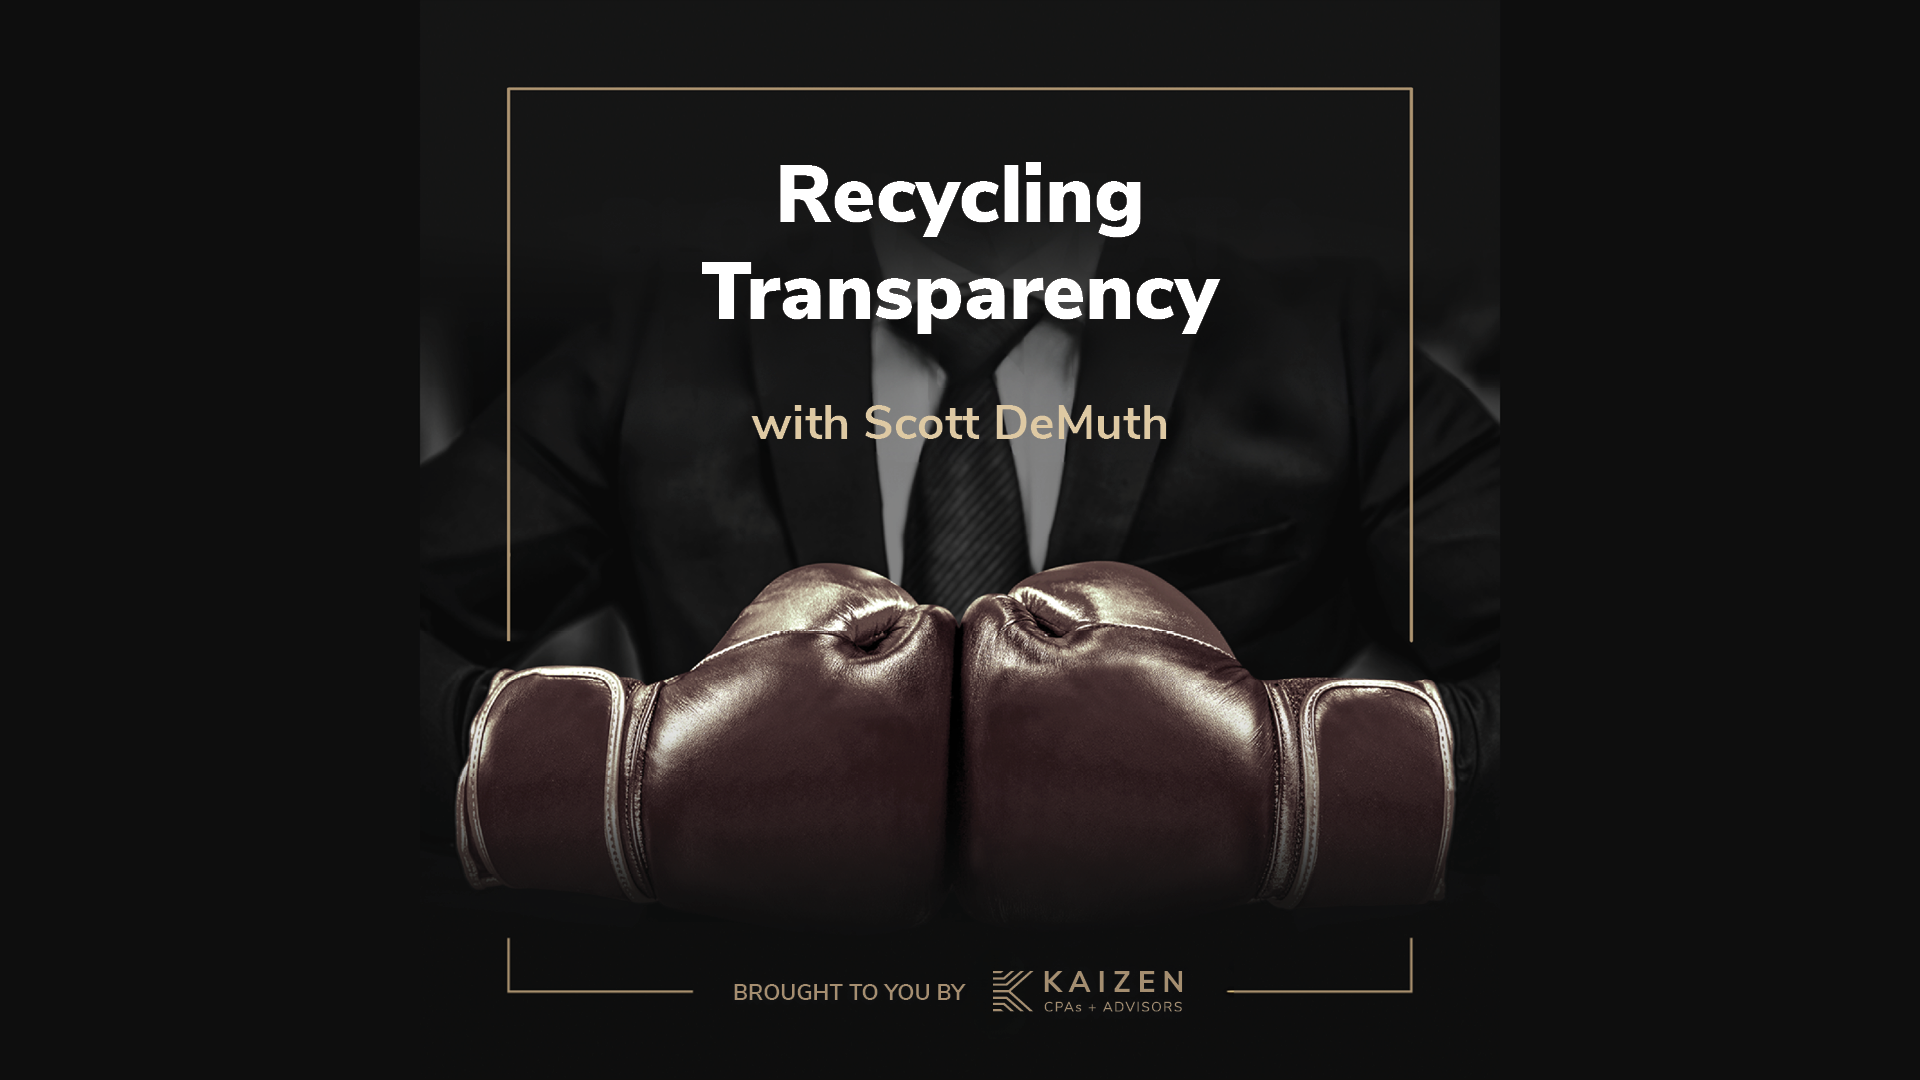 g2 revolution, led by President Scott DeMuth, is revolutionizing recycling through transparency and hard work.